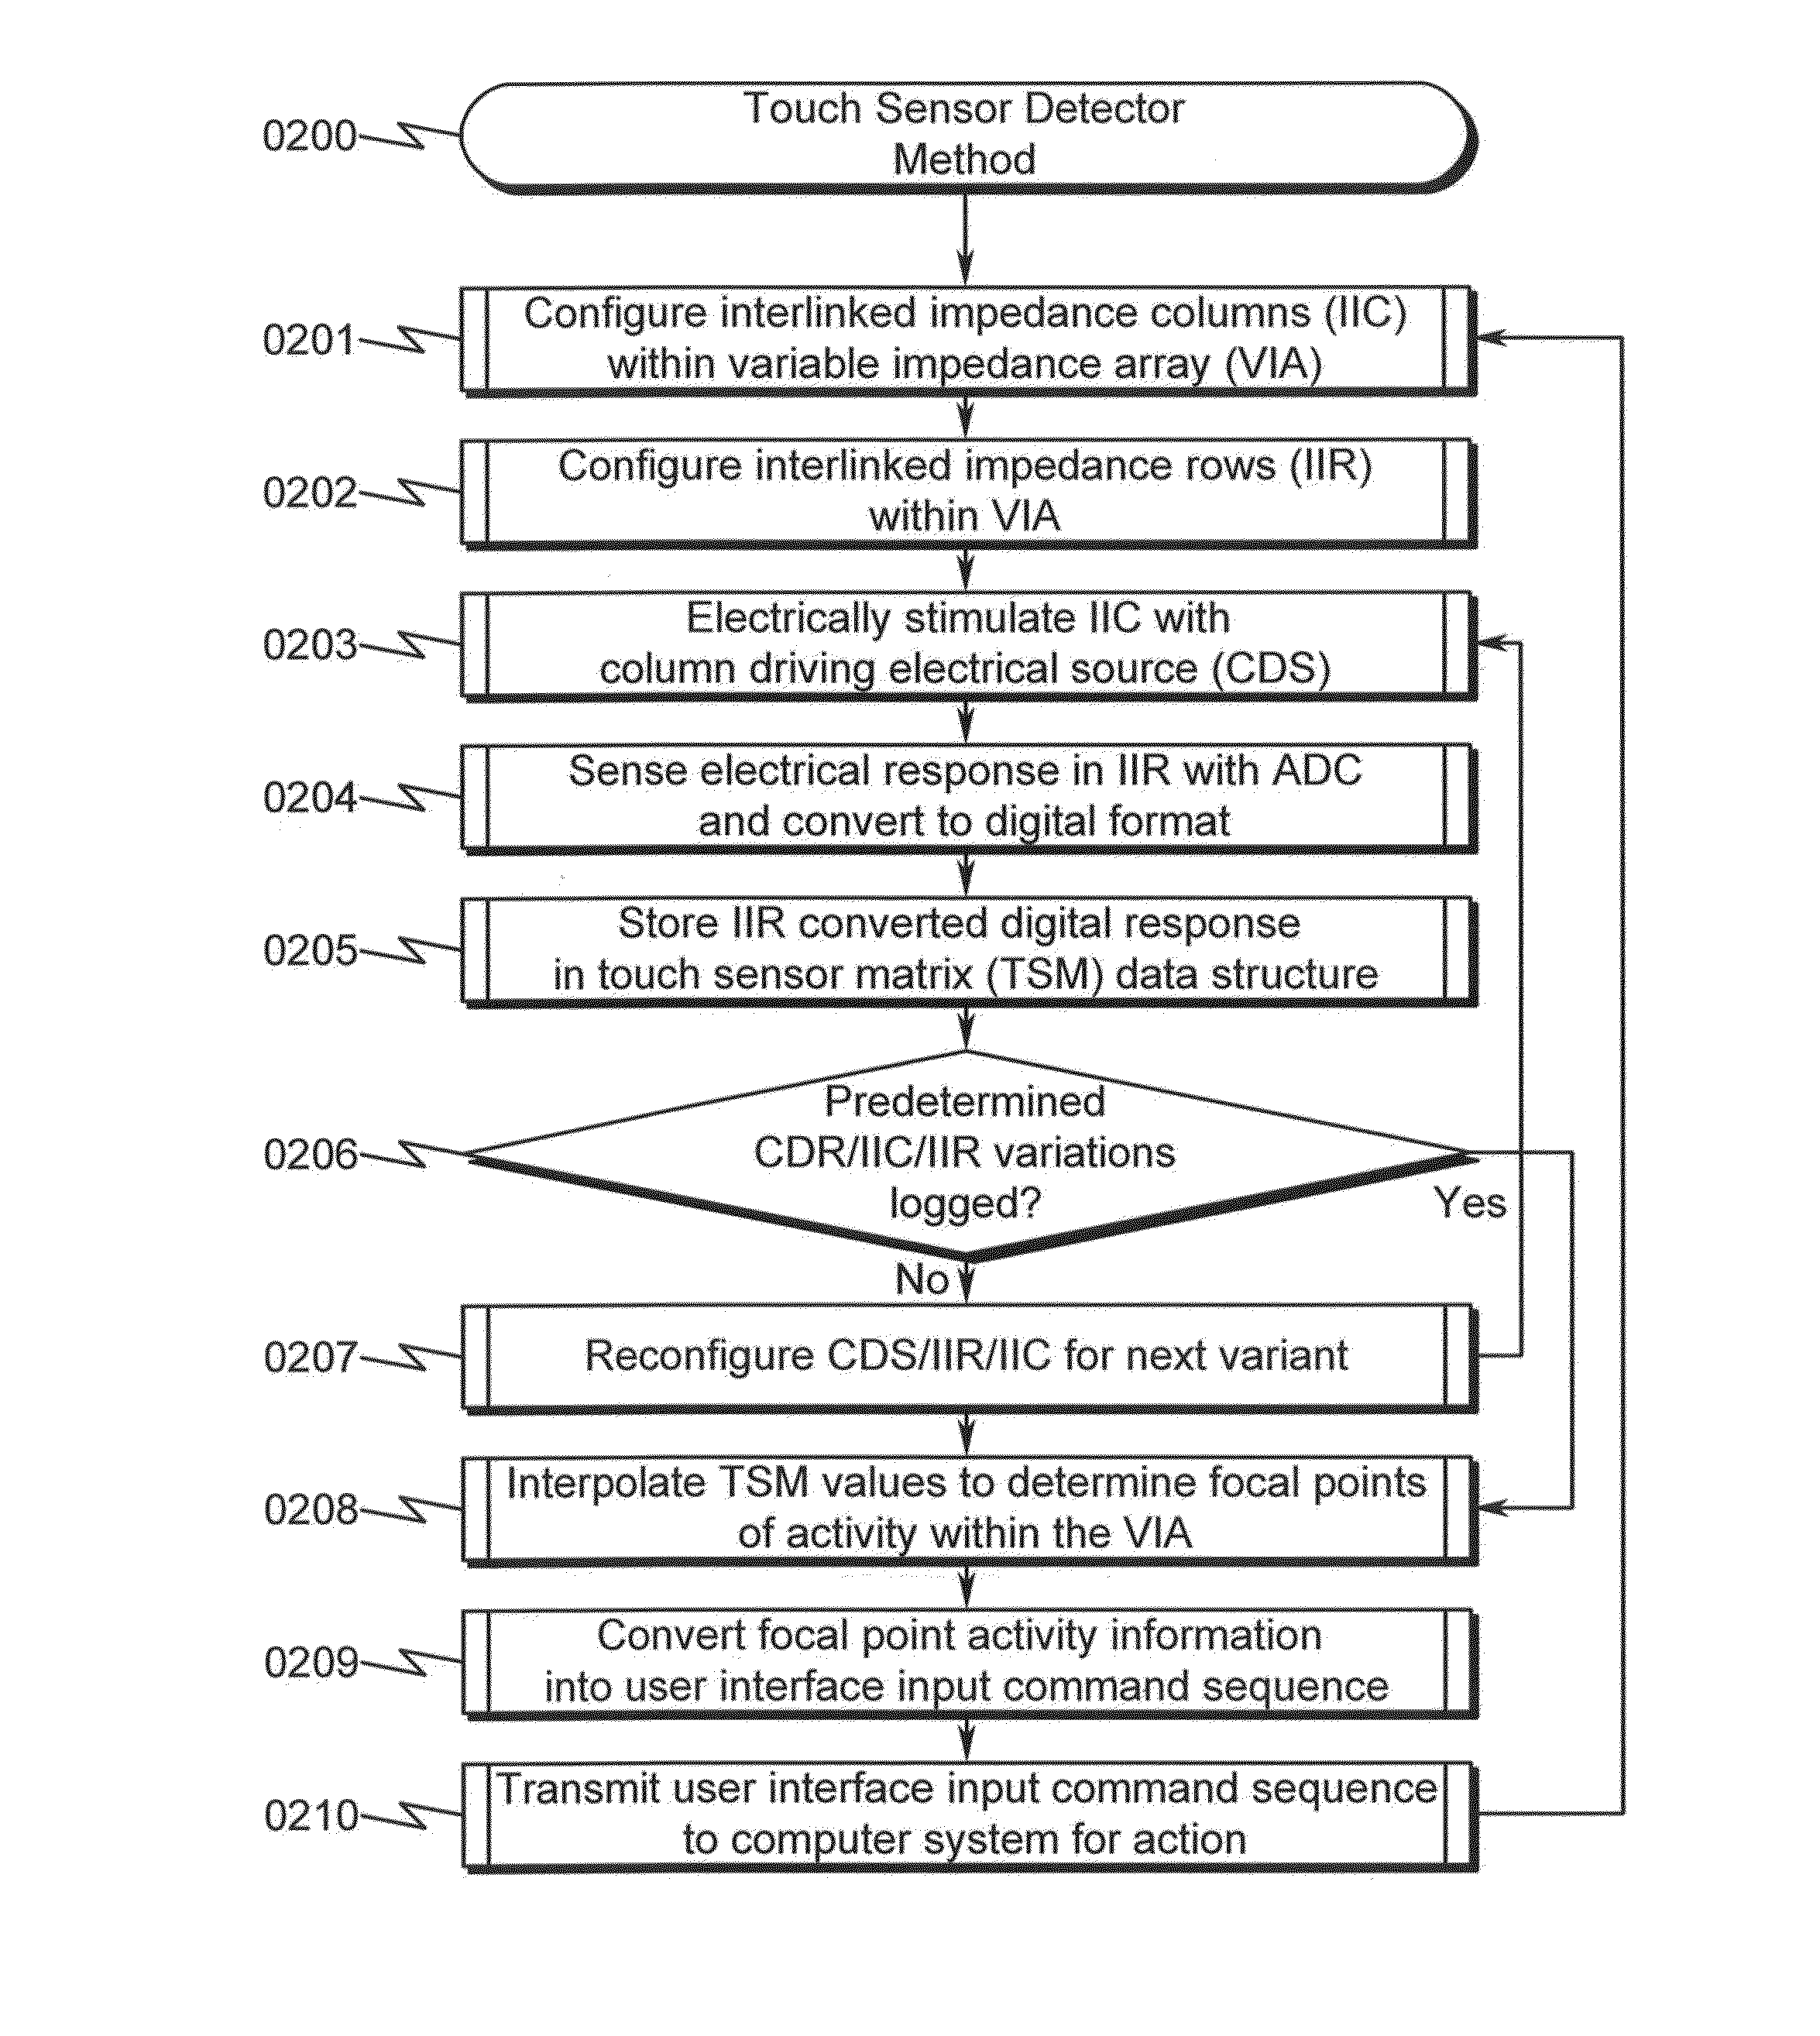 Touch Sensor Detector System and Method